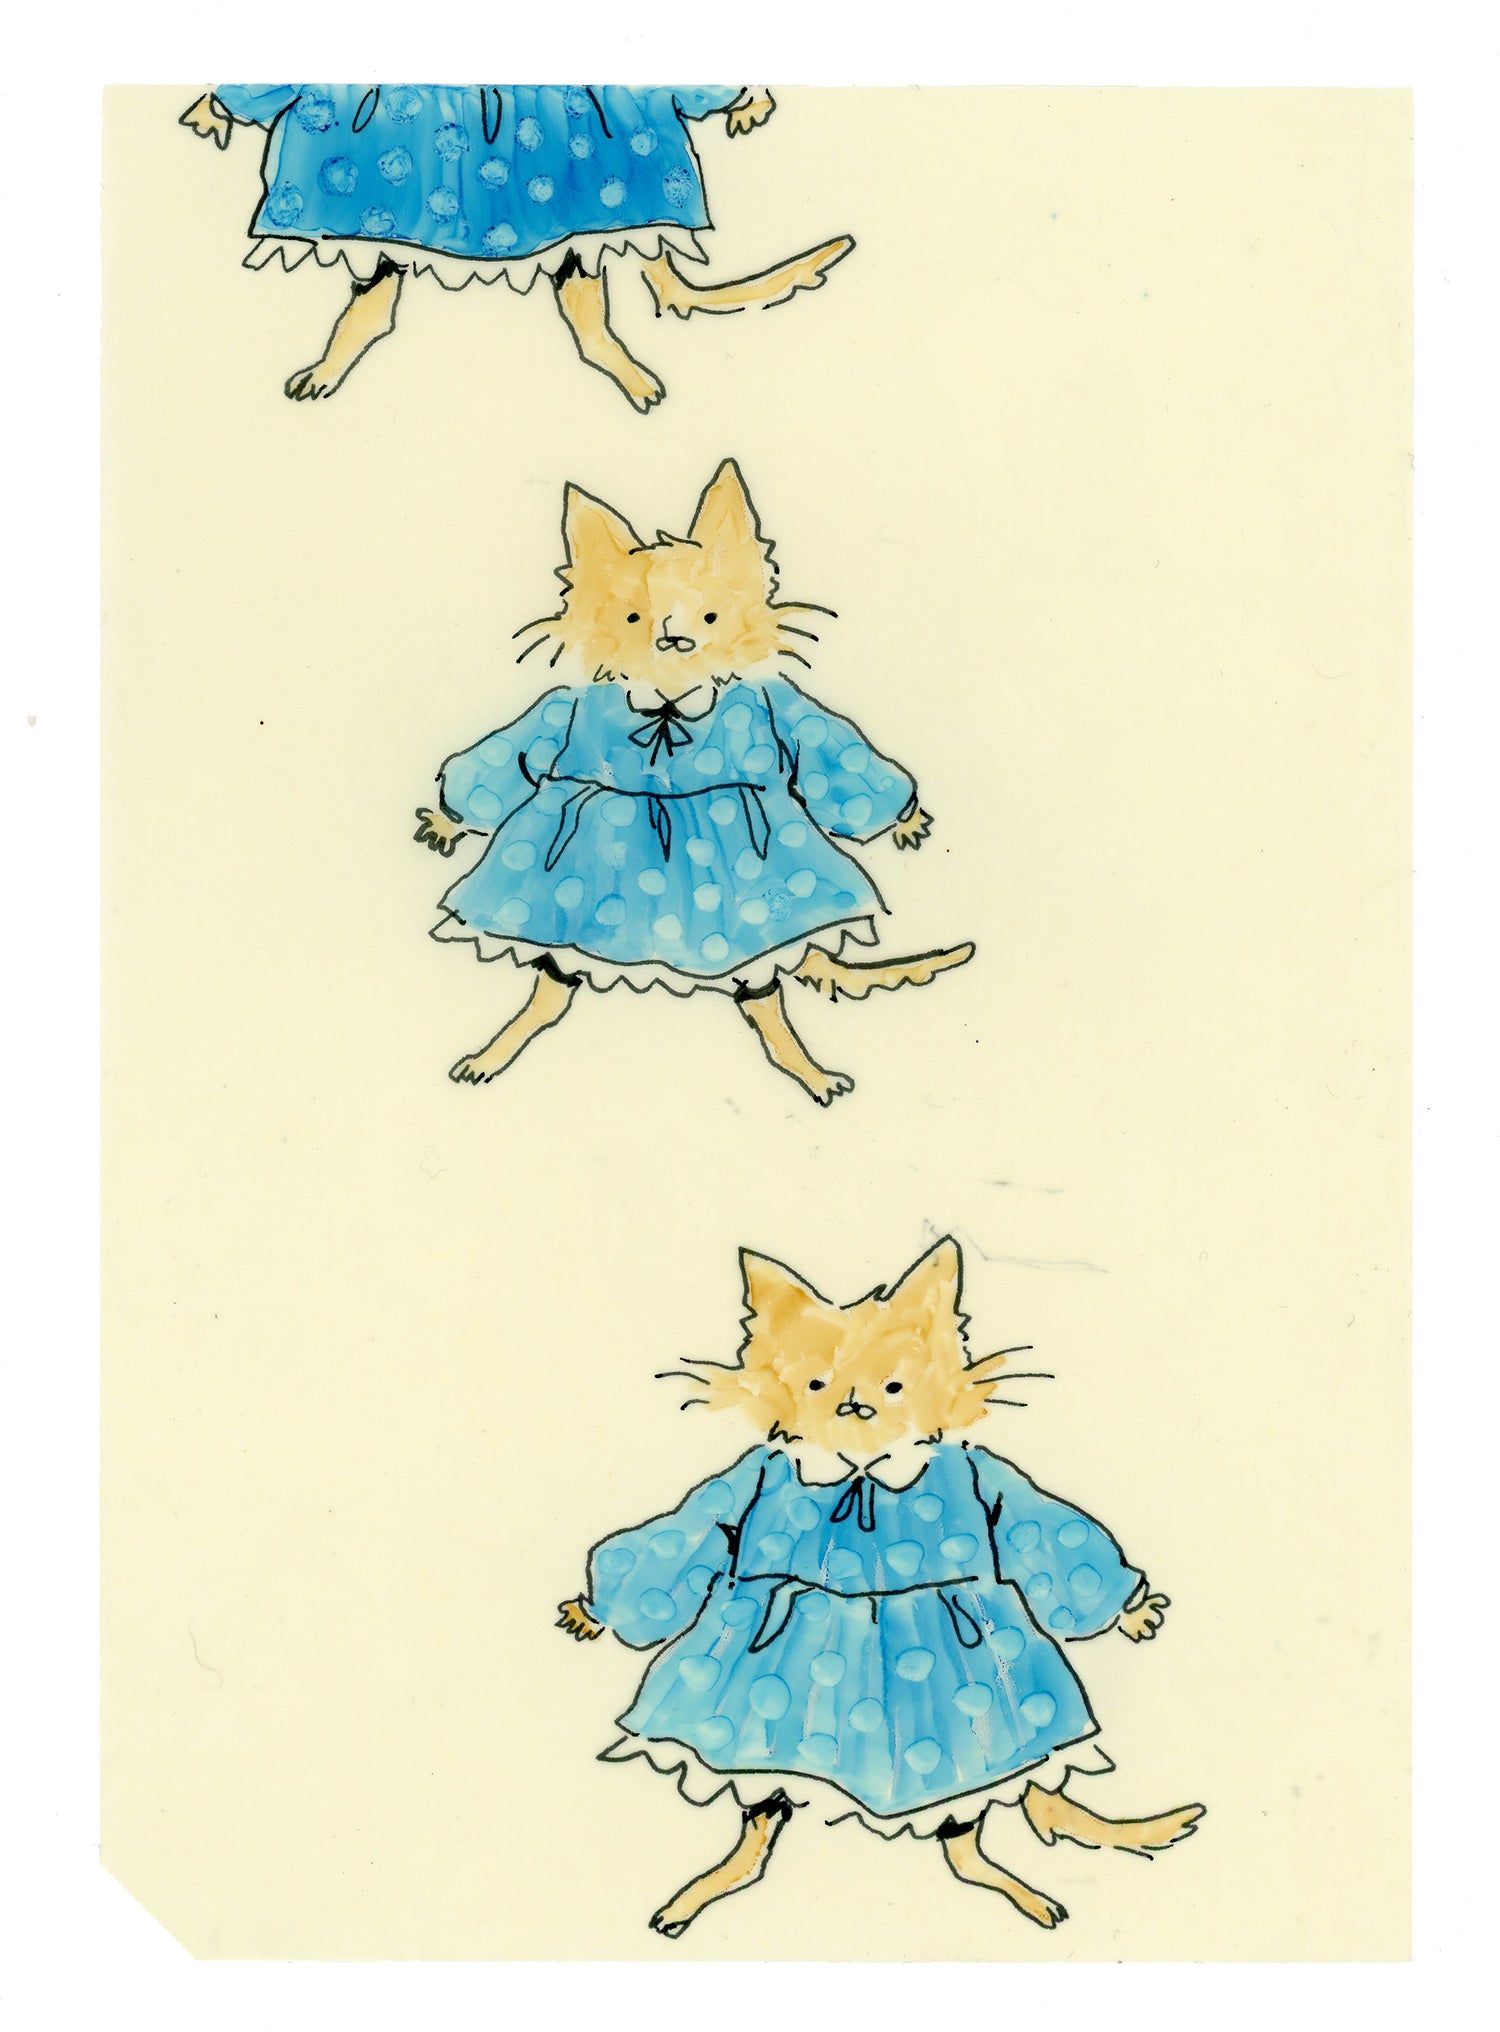 Drawing #63: "Kittens in Dresses" [Beeswaxed Midori A5 paper]